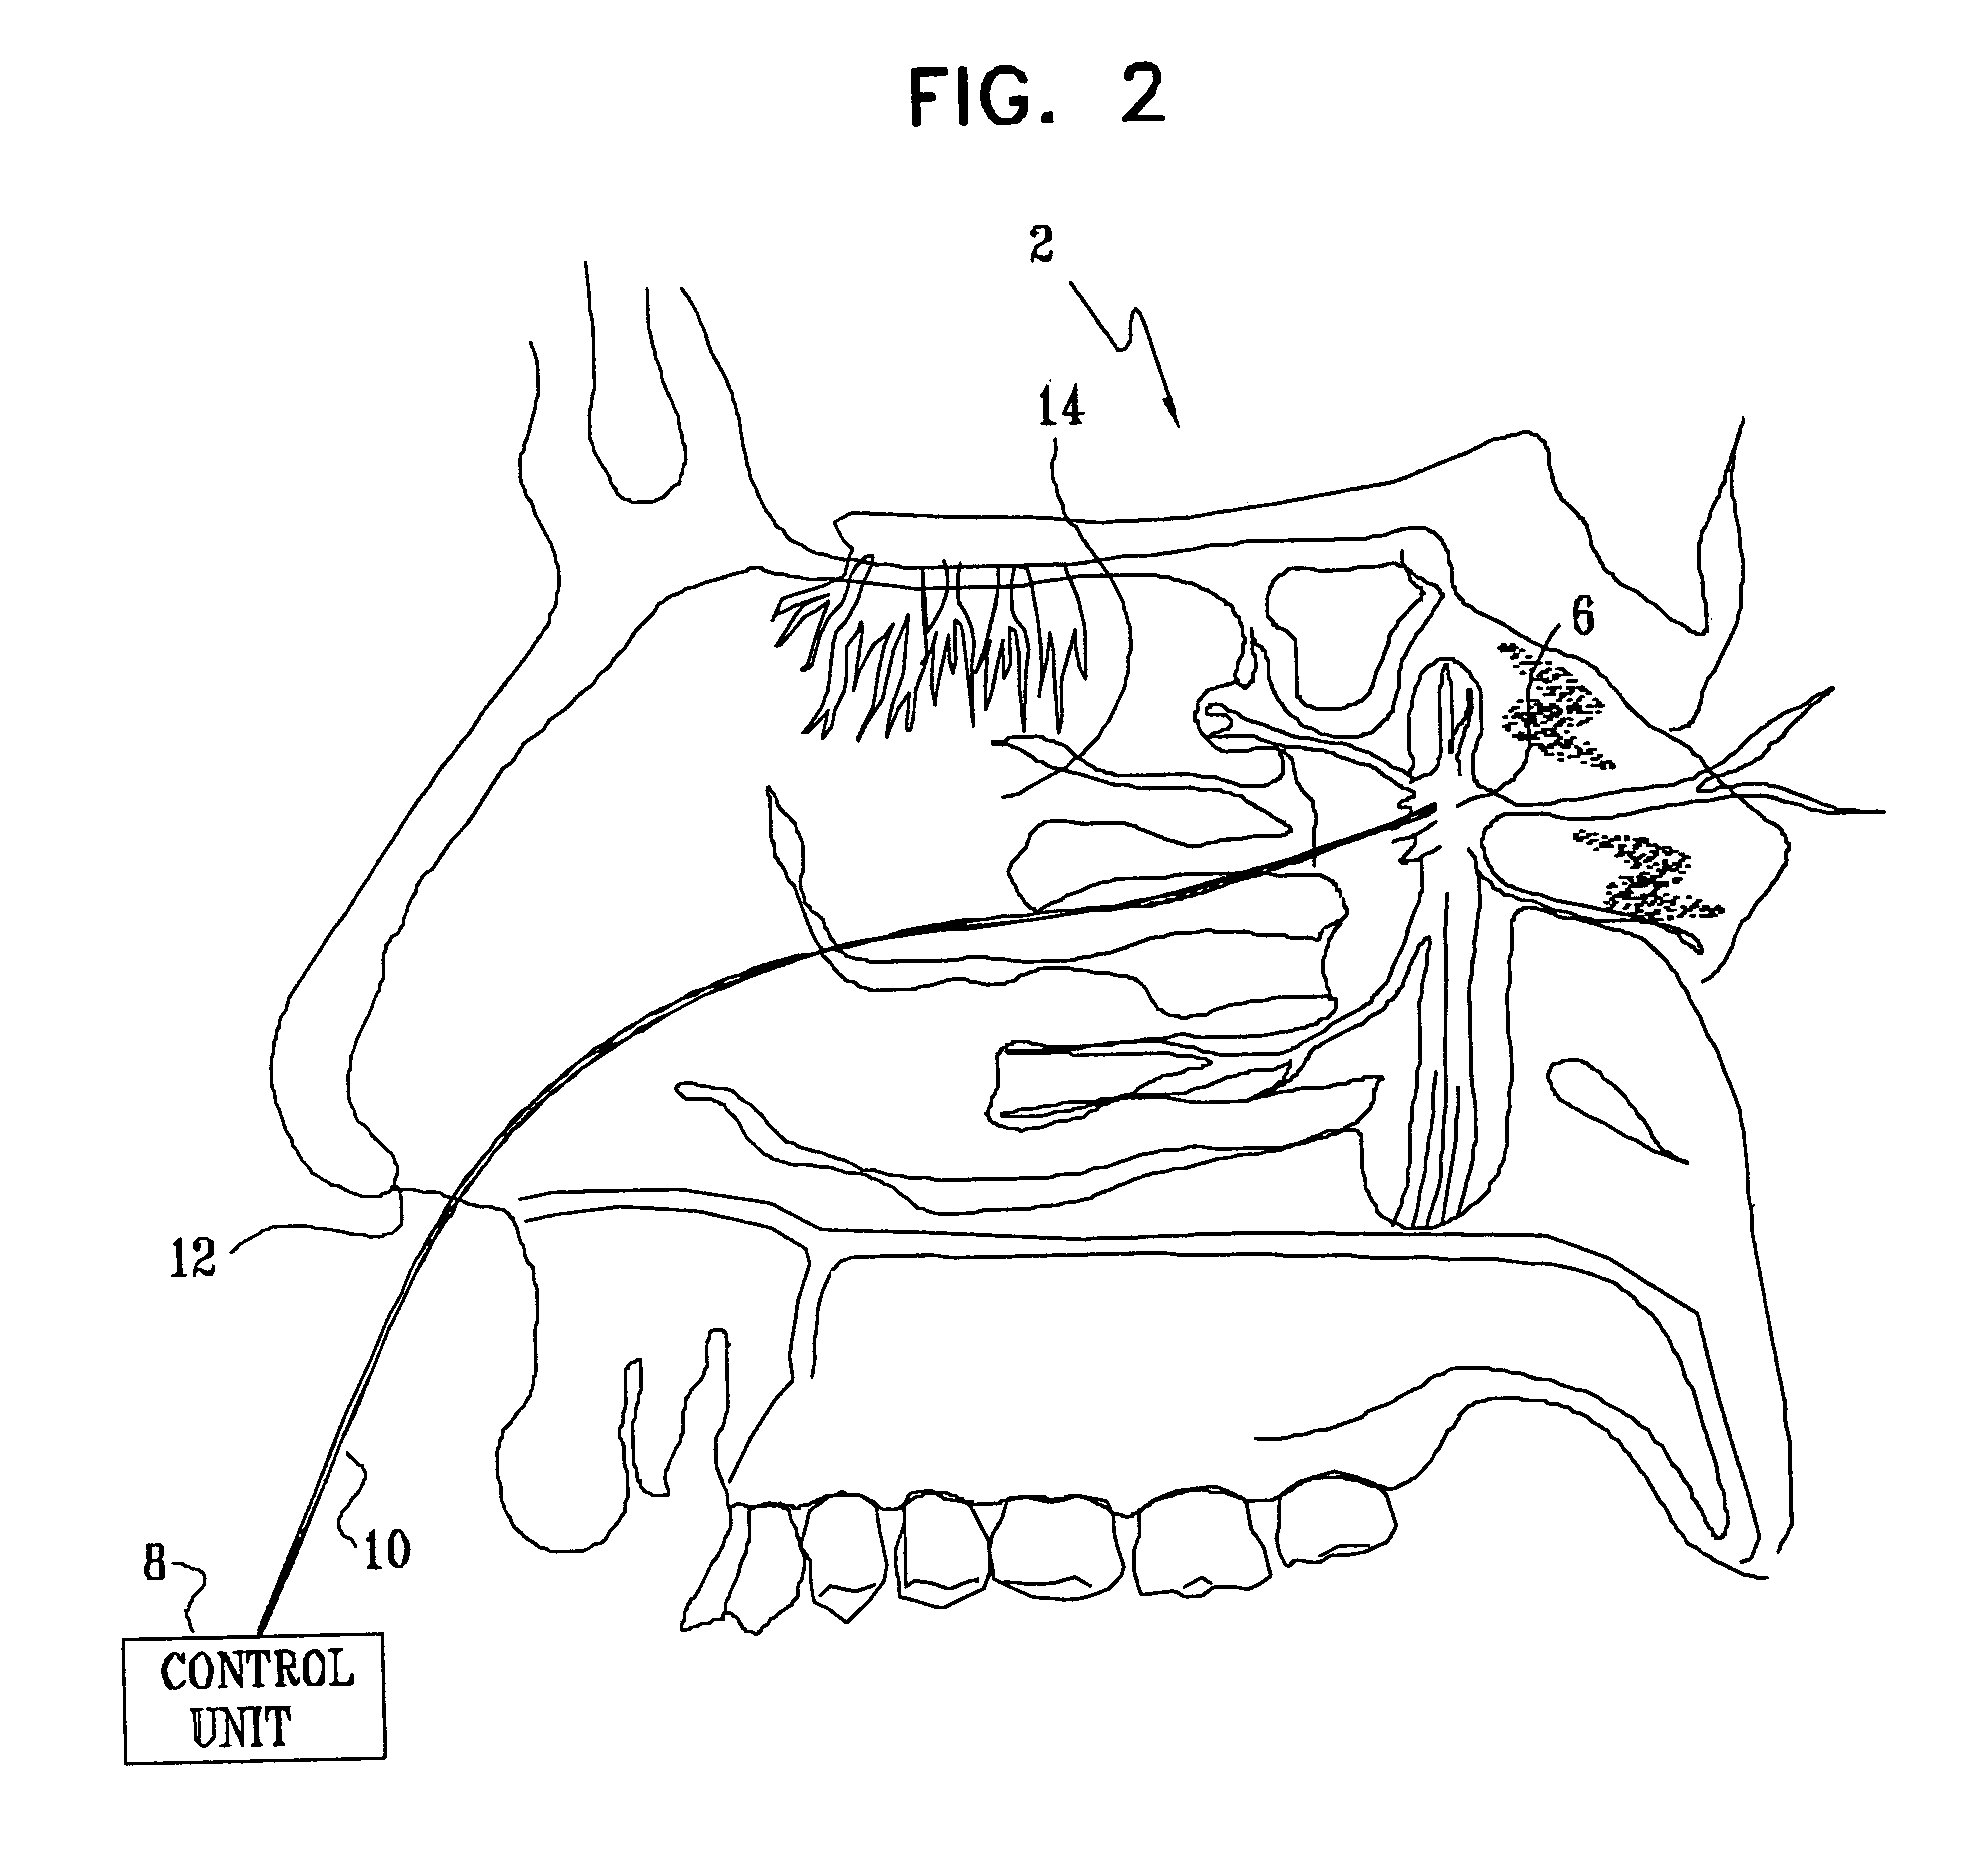 Method and apparatus for stimulating the sphenopalatine ganglion to modify properties of the BBB and cerebral blood flow